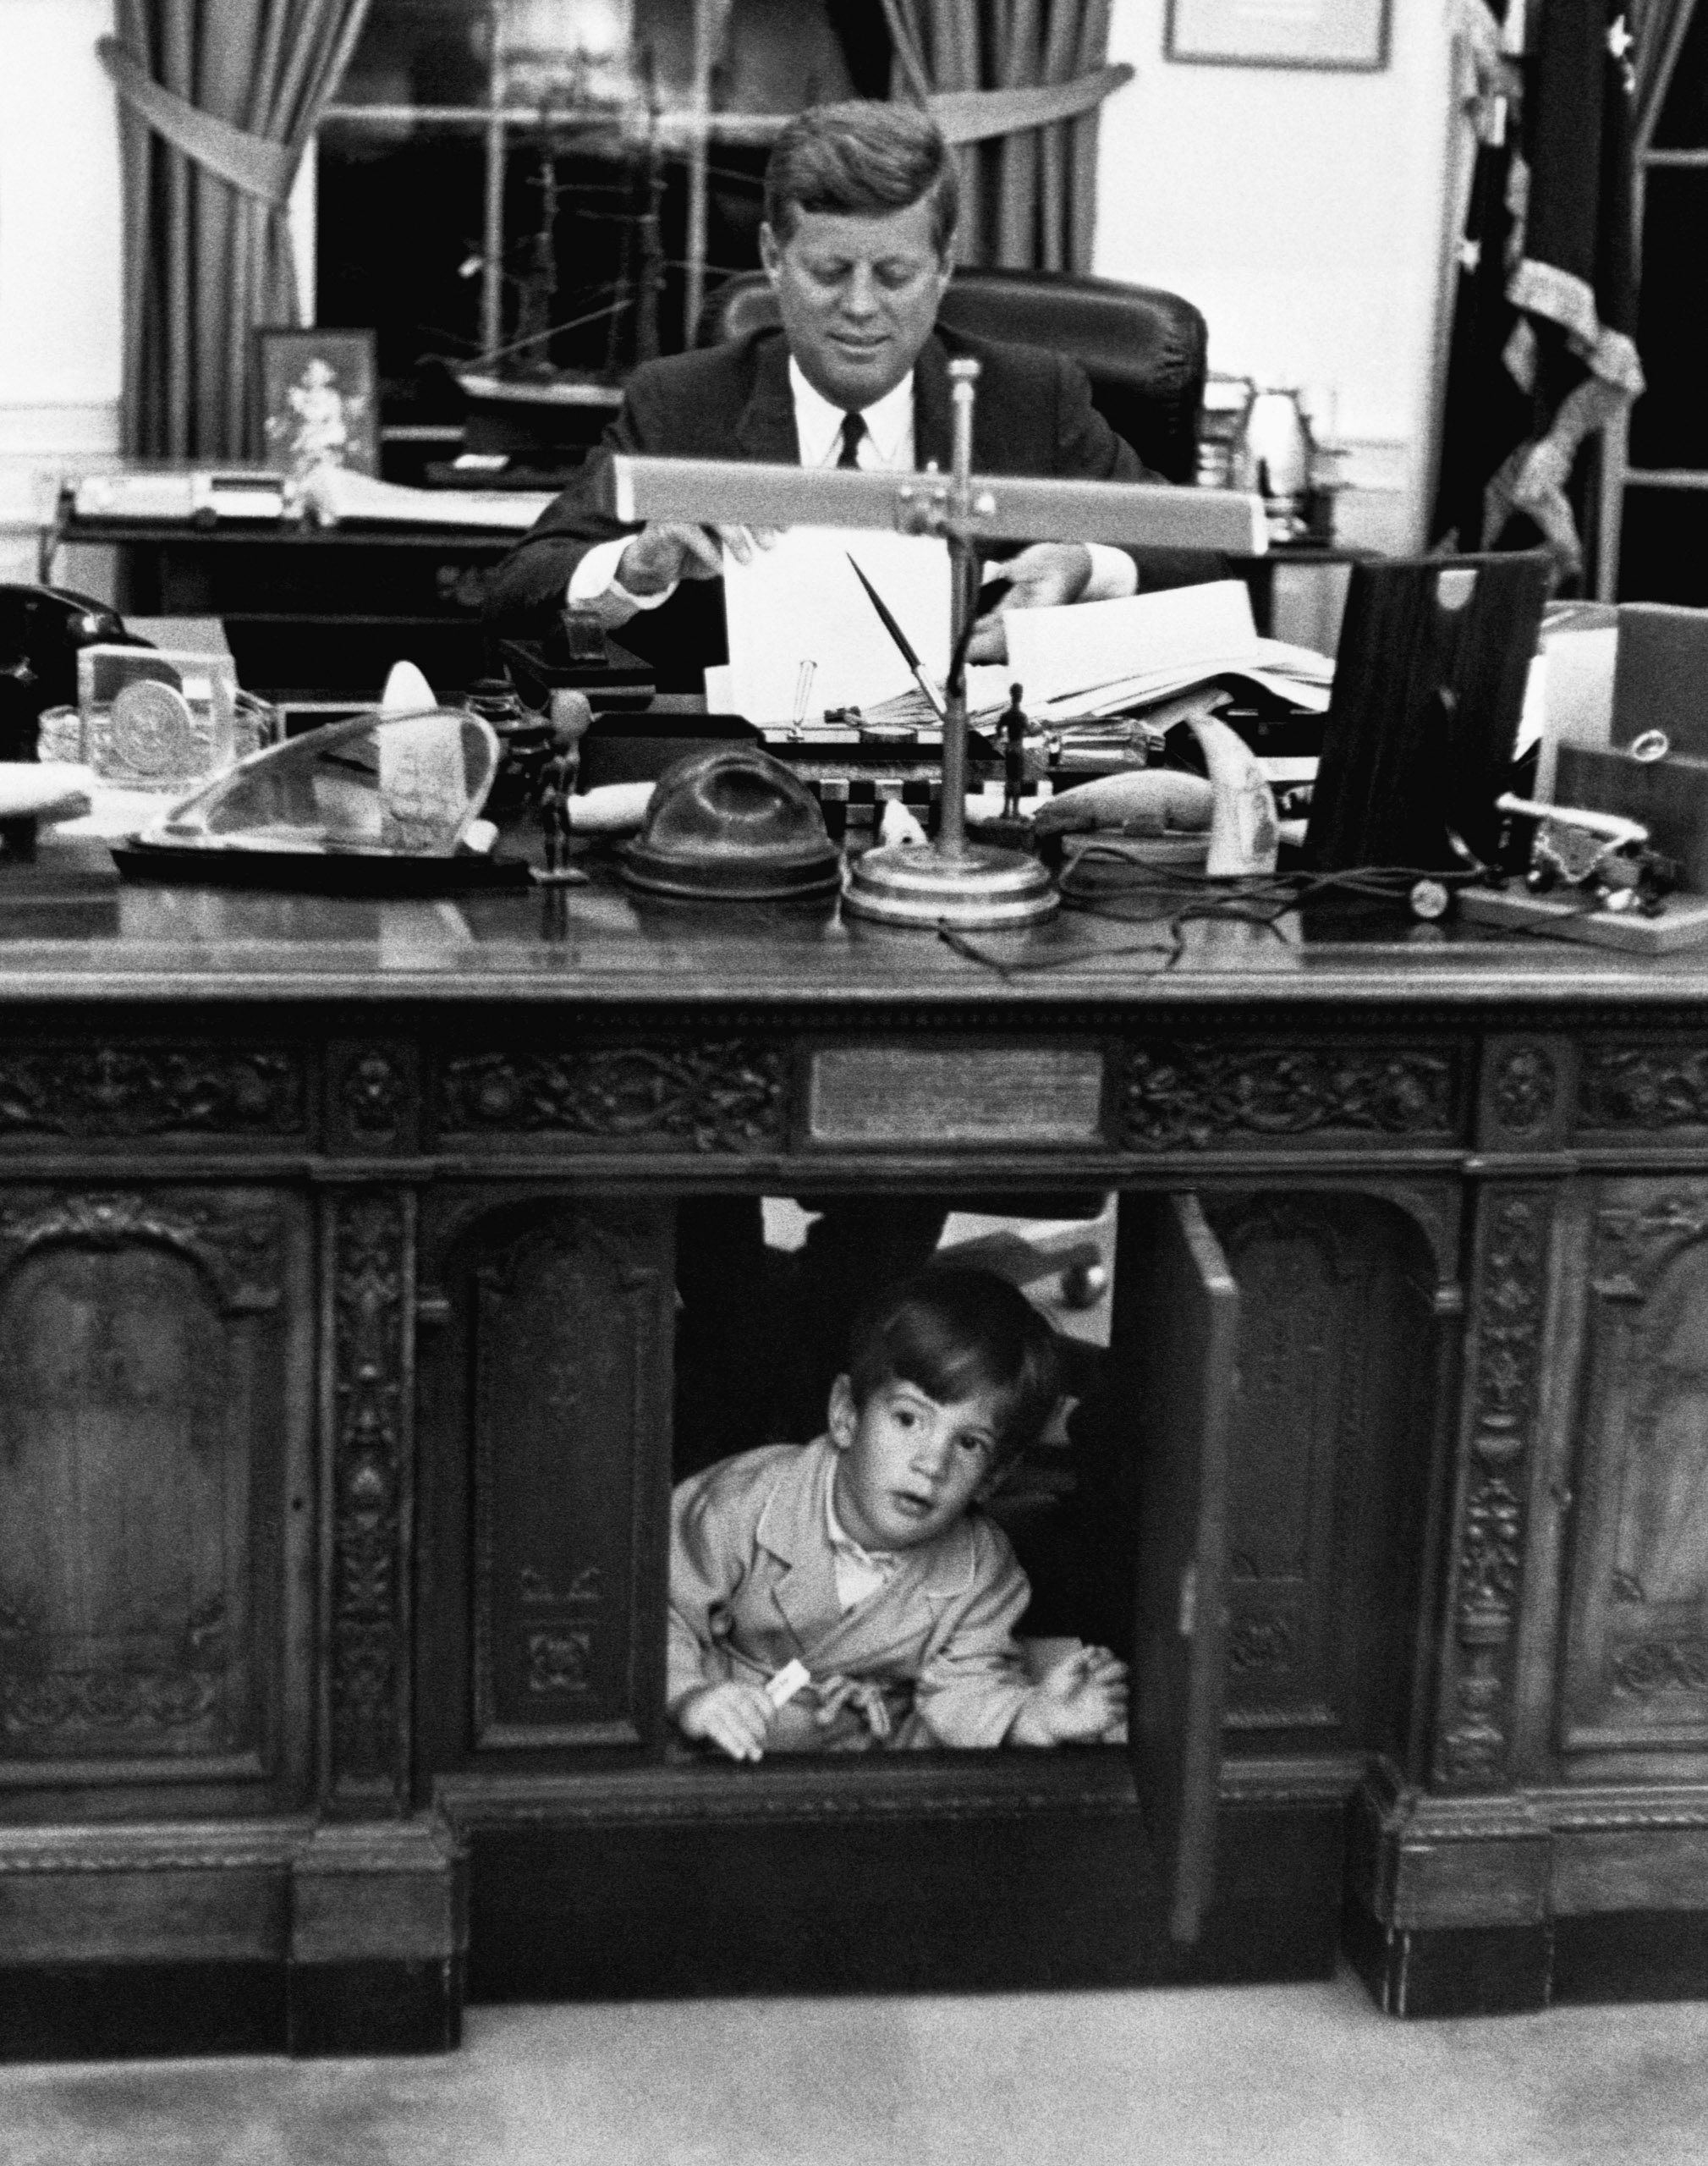 Pres. John F. Kennedy playing w. his son John F. Kennedy Jr. at his desk in the Oval Office. 1963.